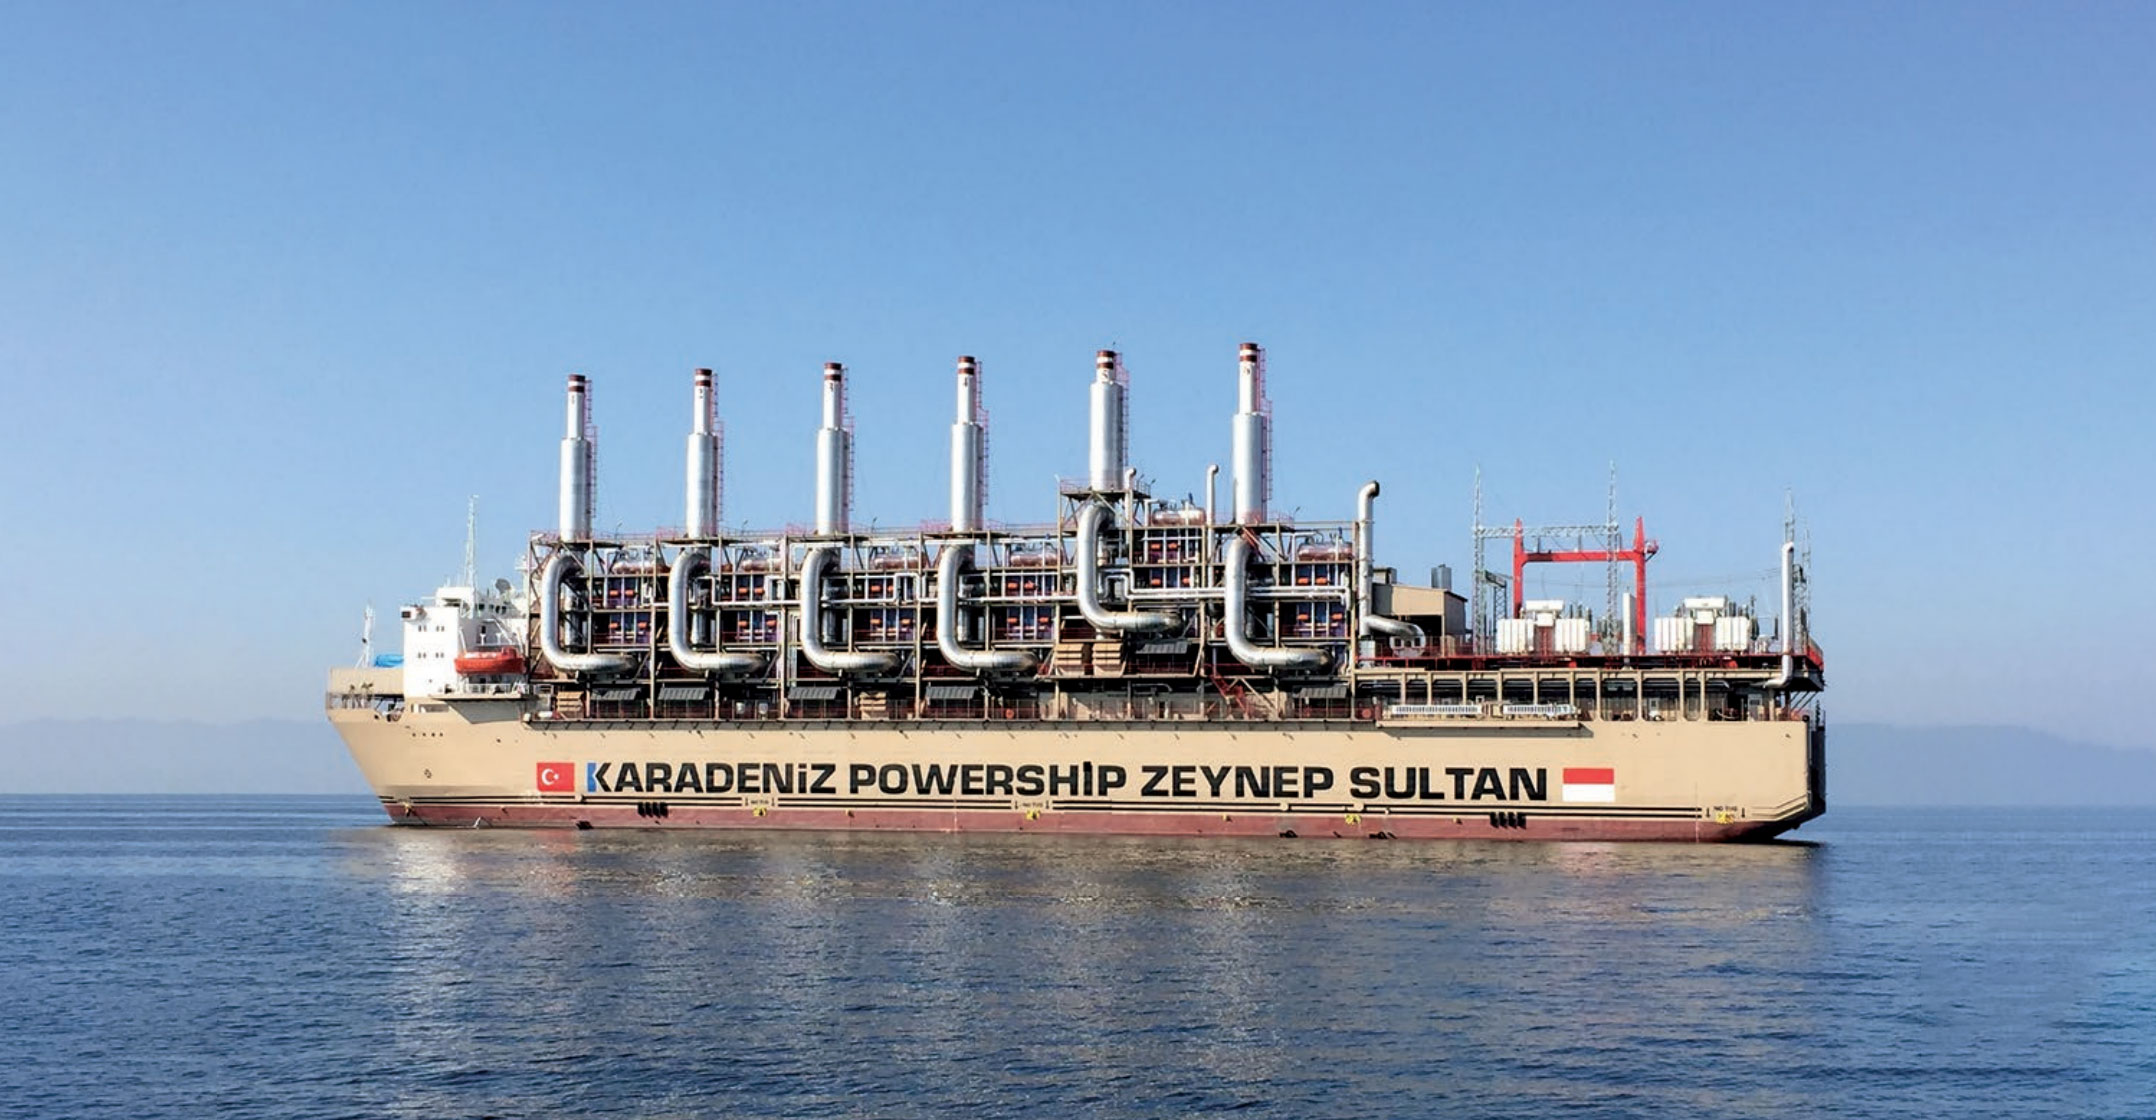 South Africa could pay up to R218-billion for power ships - TechCentral